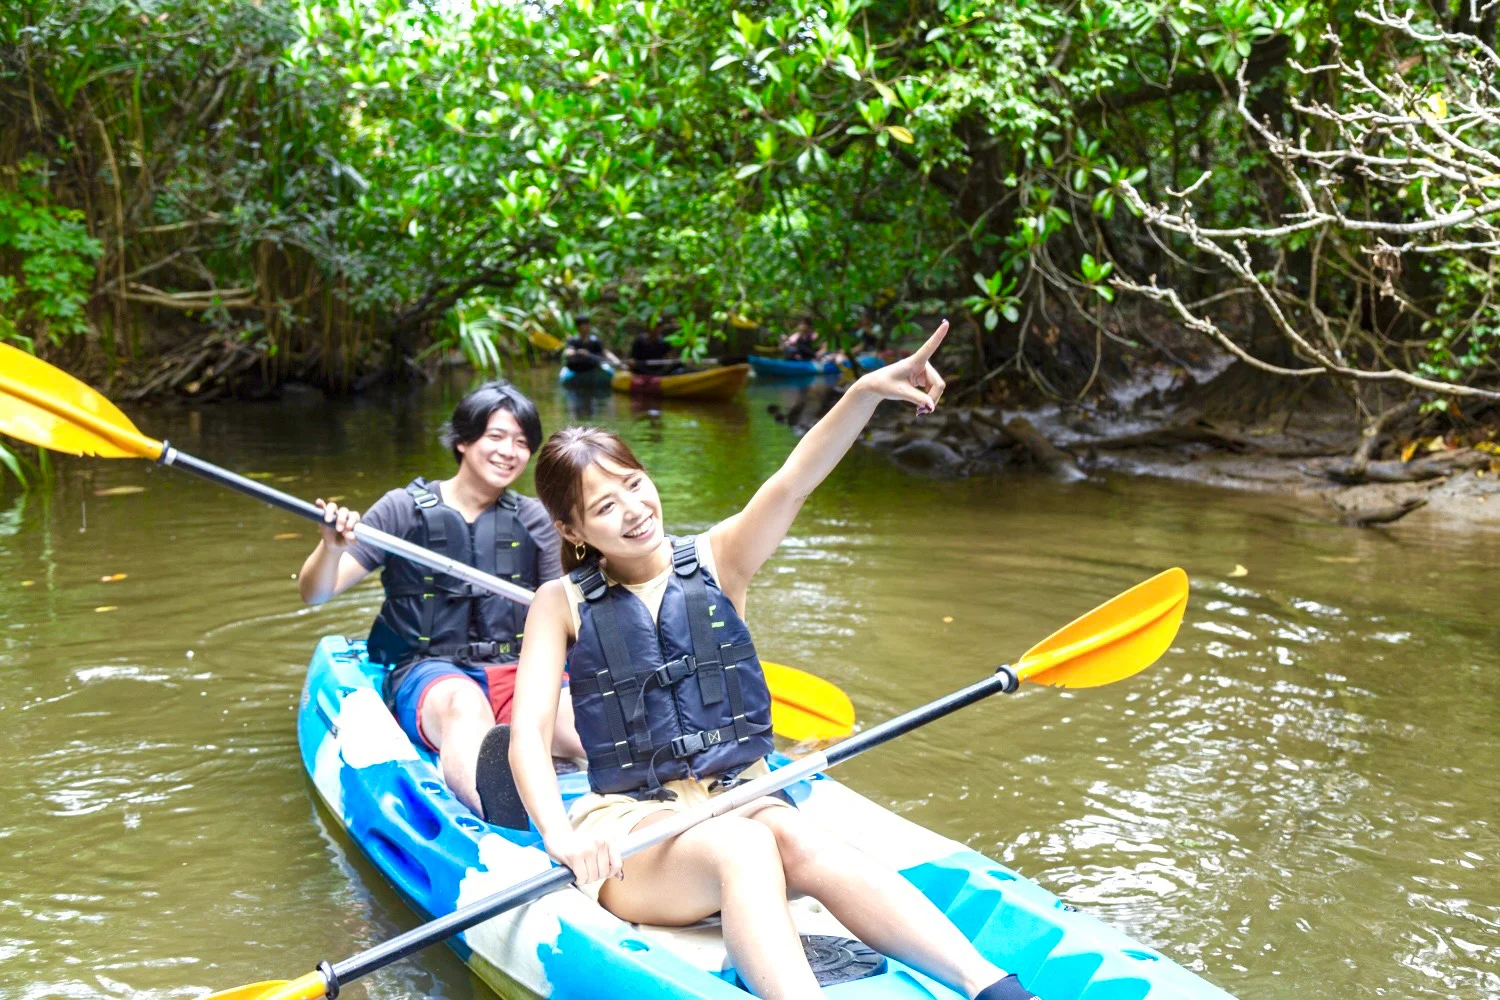 Yubu Island Sightseeing and Mangrove Tour by SUP or Canoe